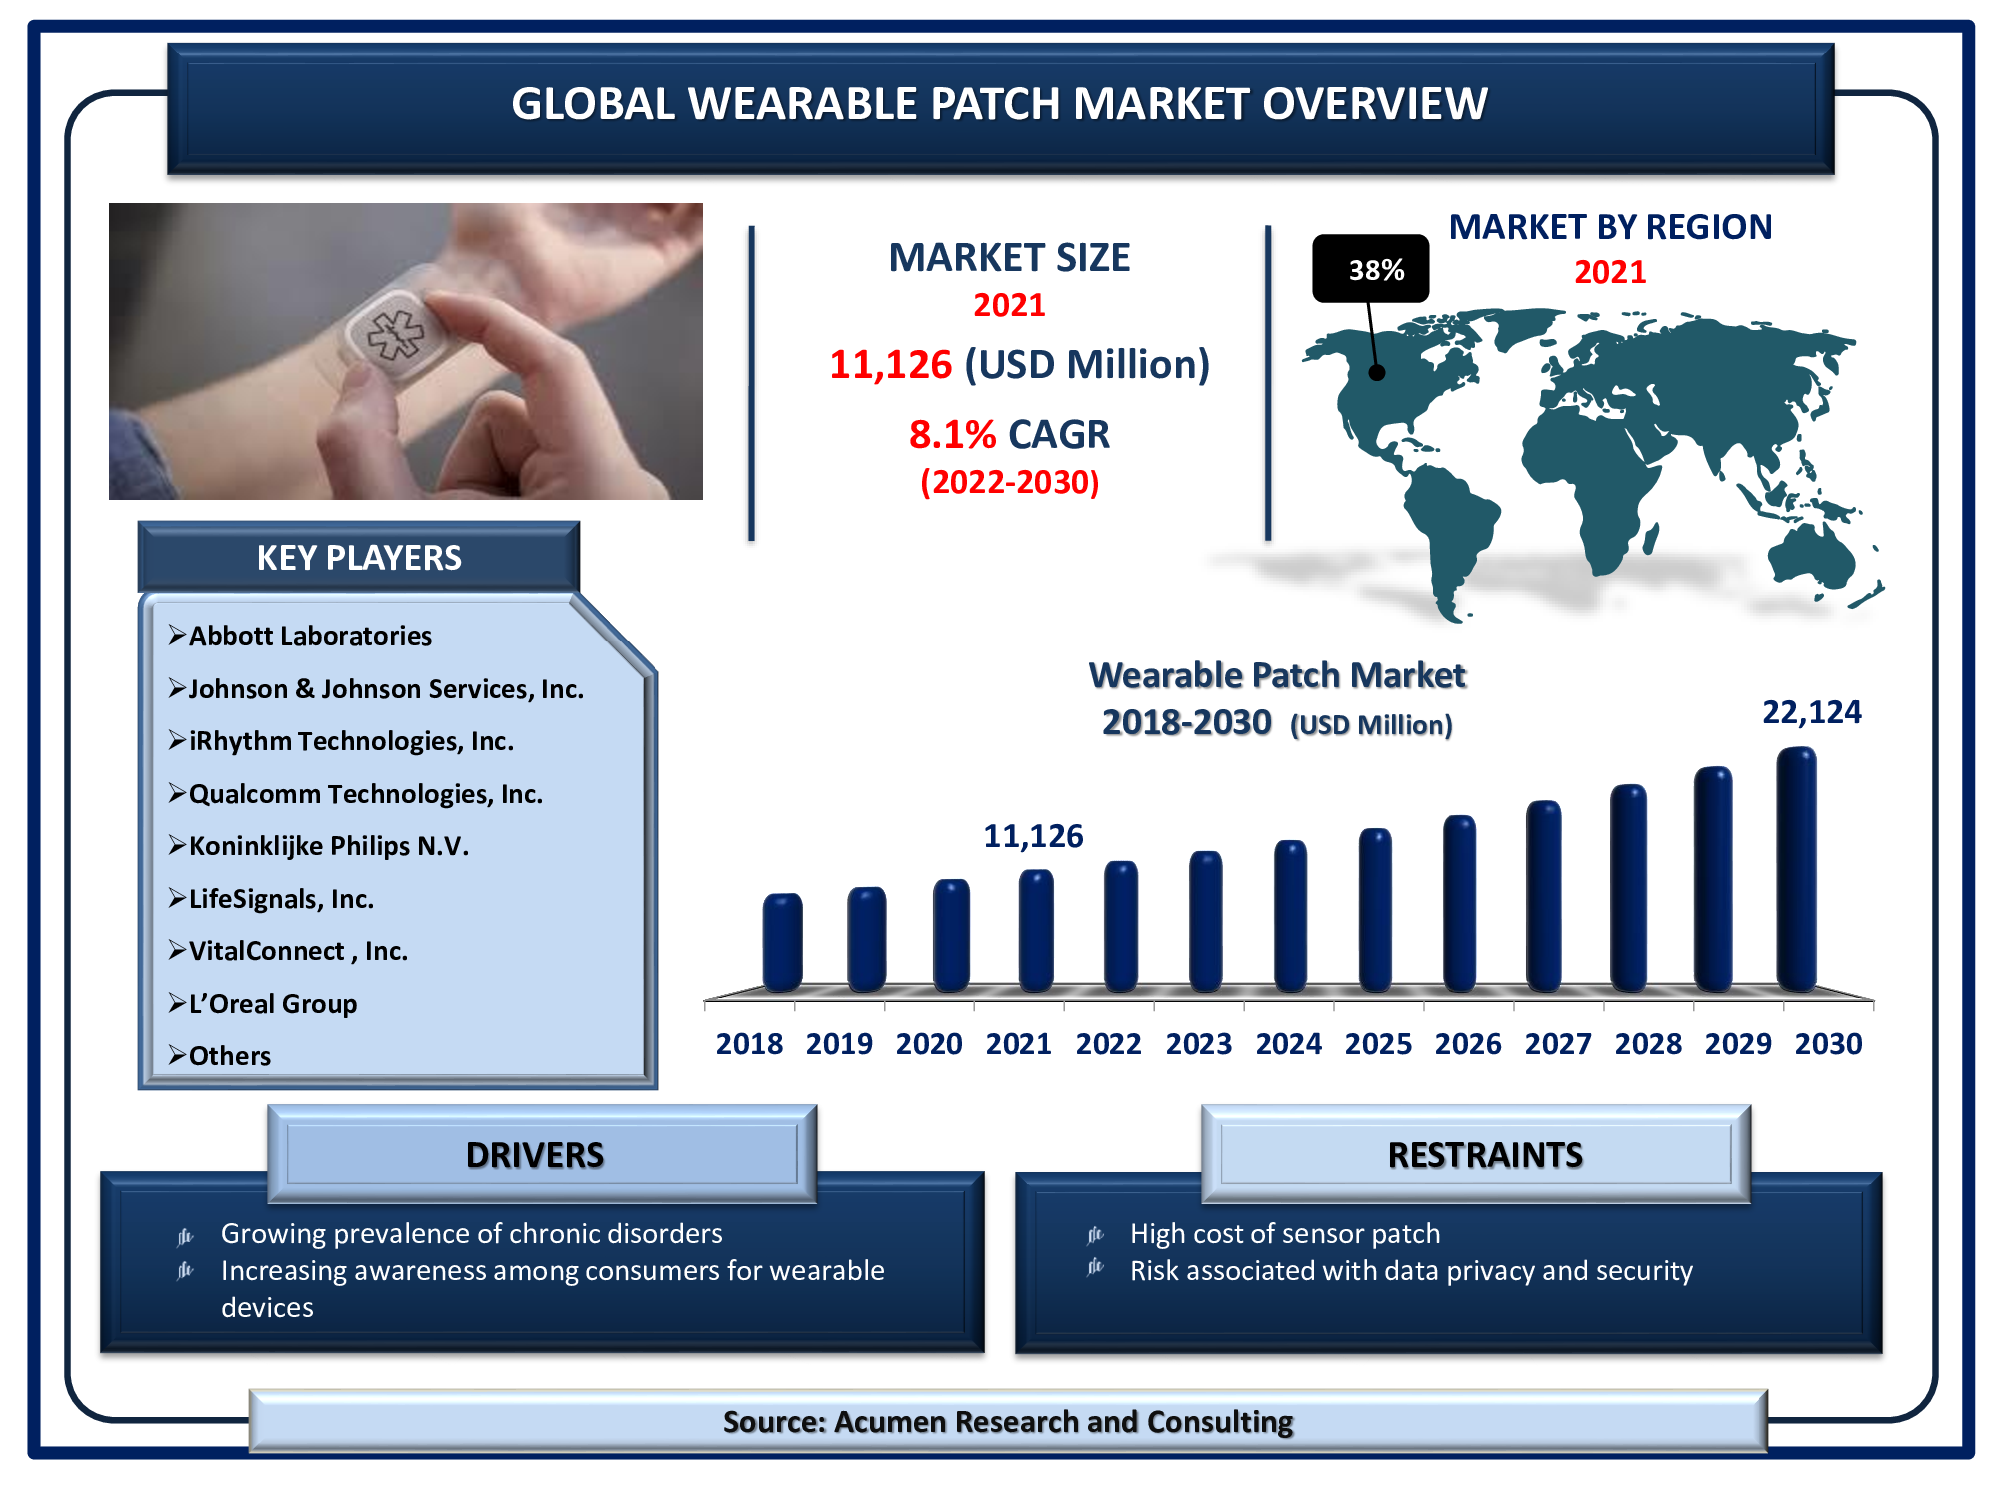 The Global Wearable Patch Market Size is valued at USD 11,126 million in 2021 and is estimated to achieve a market size of USD 22,124 million by 2030; growing at a CAGR of 8.1%.